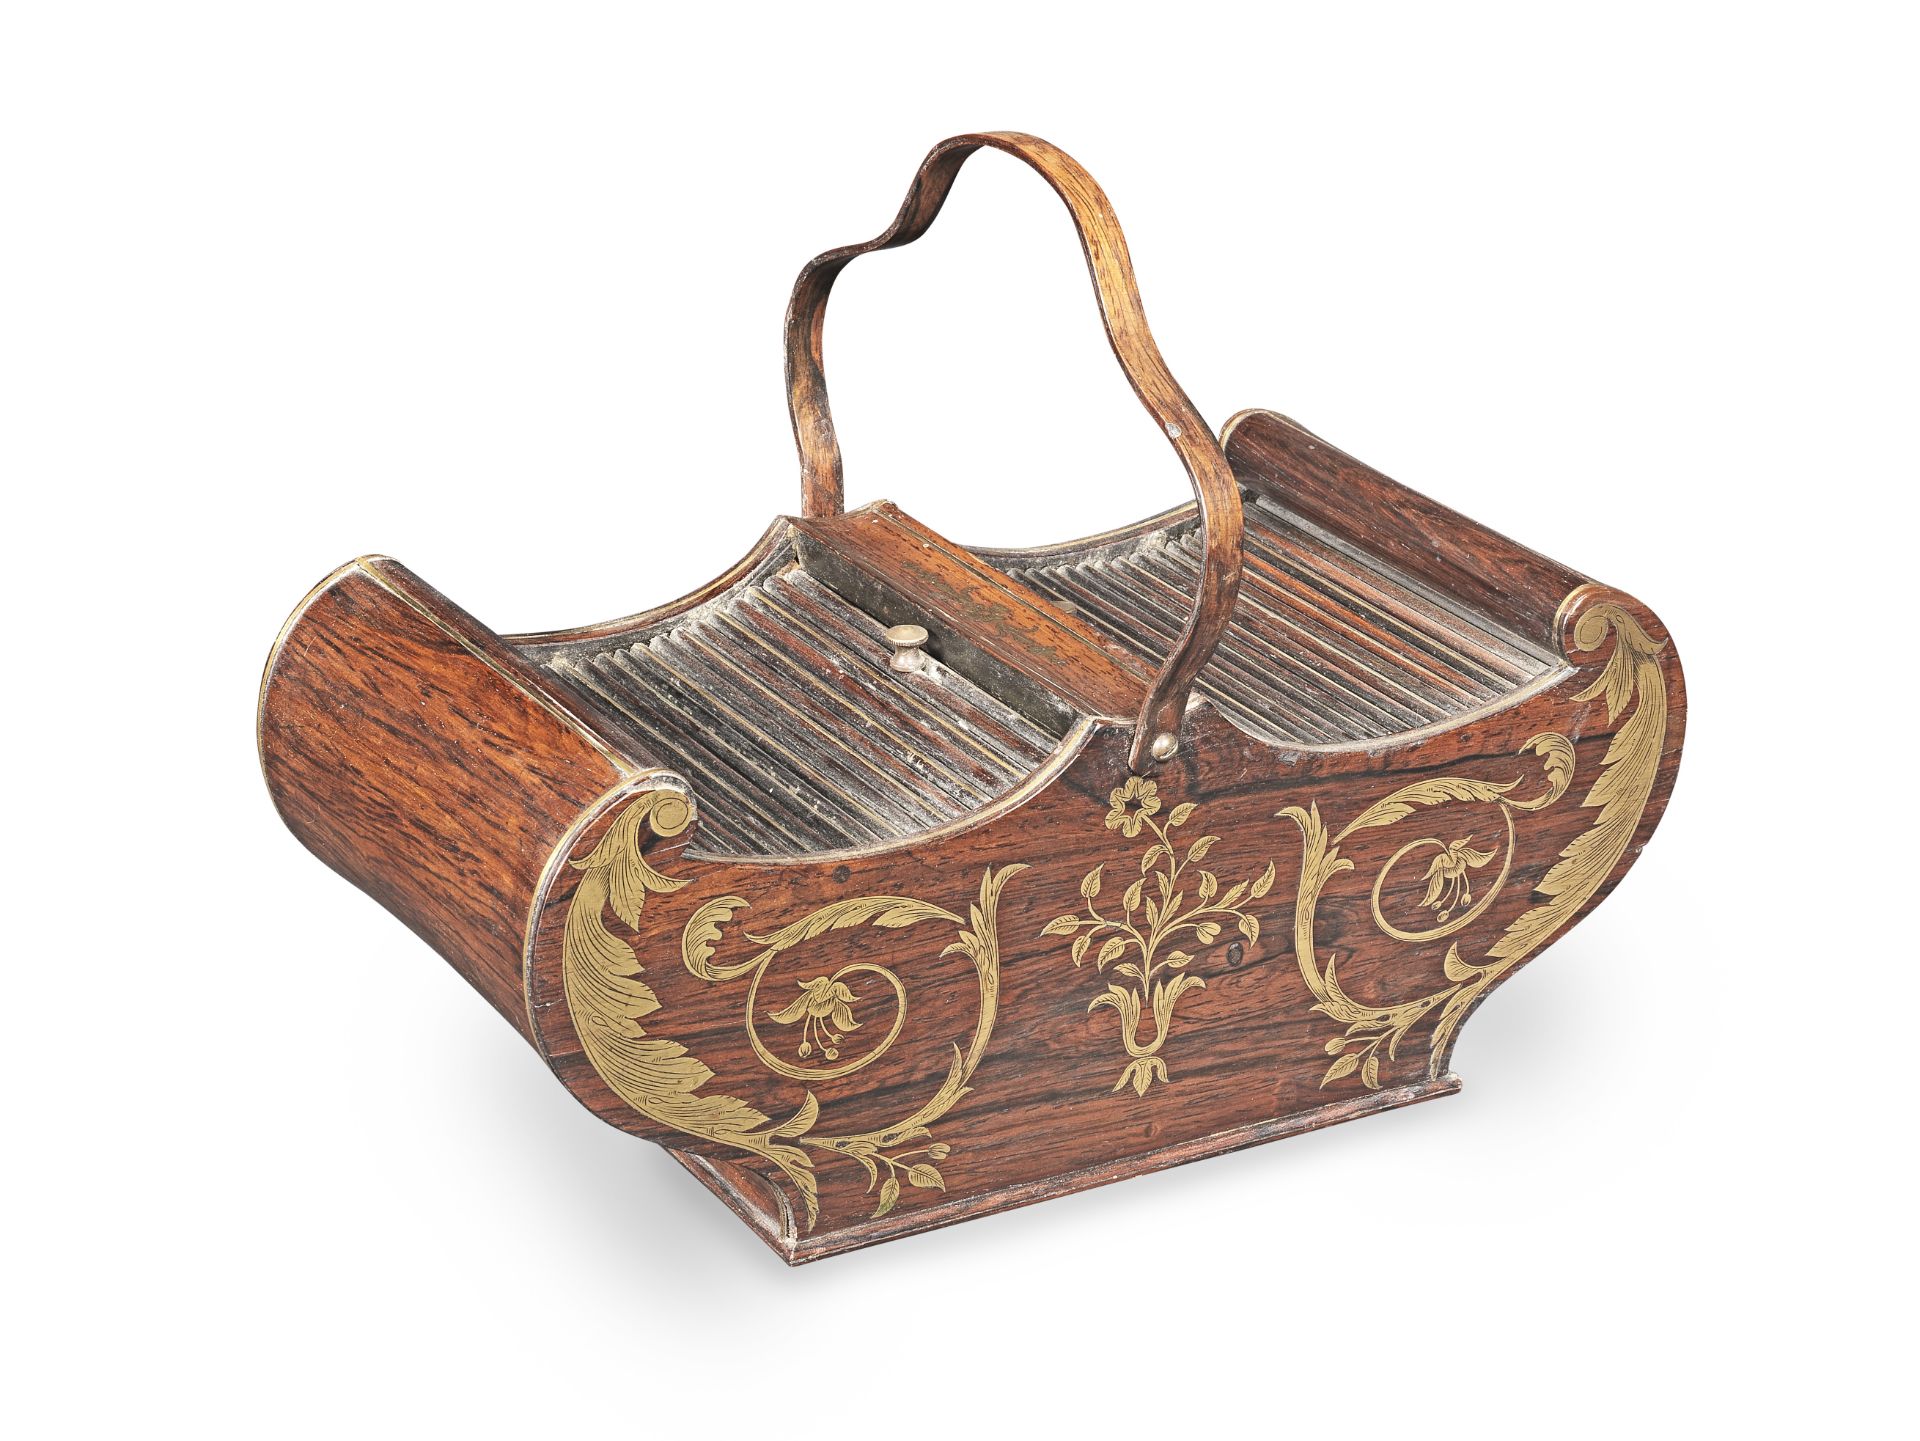 A Regency rosewood and brass-inlaid work box, or 'basket', circa 1815